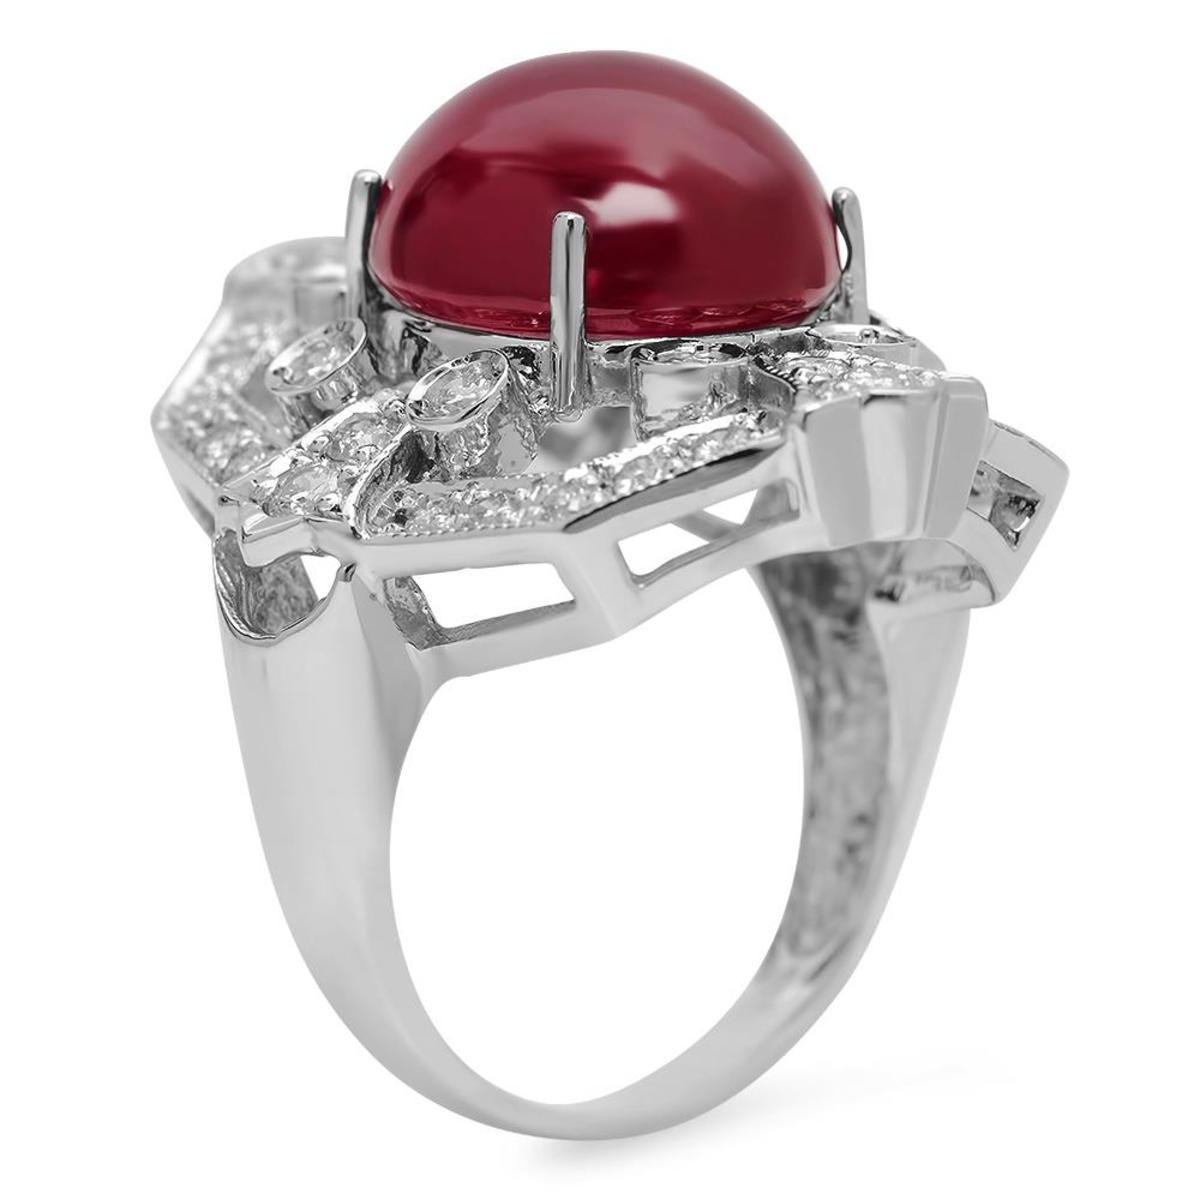 14K White Gold 14.68ct Ruby and 1.10ct Diamond Ring